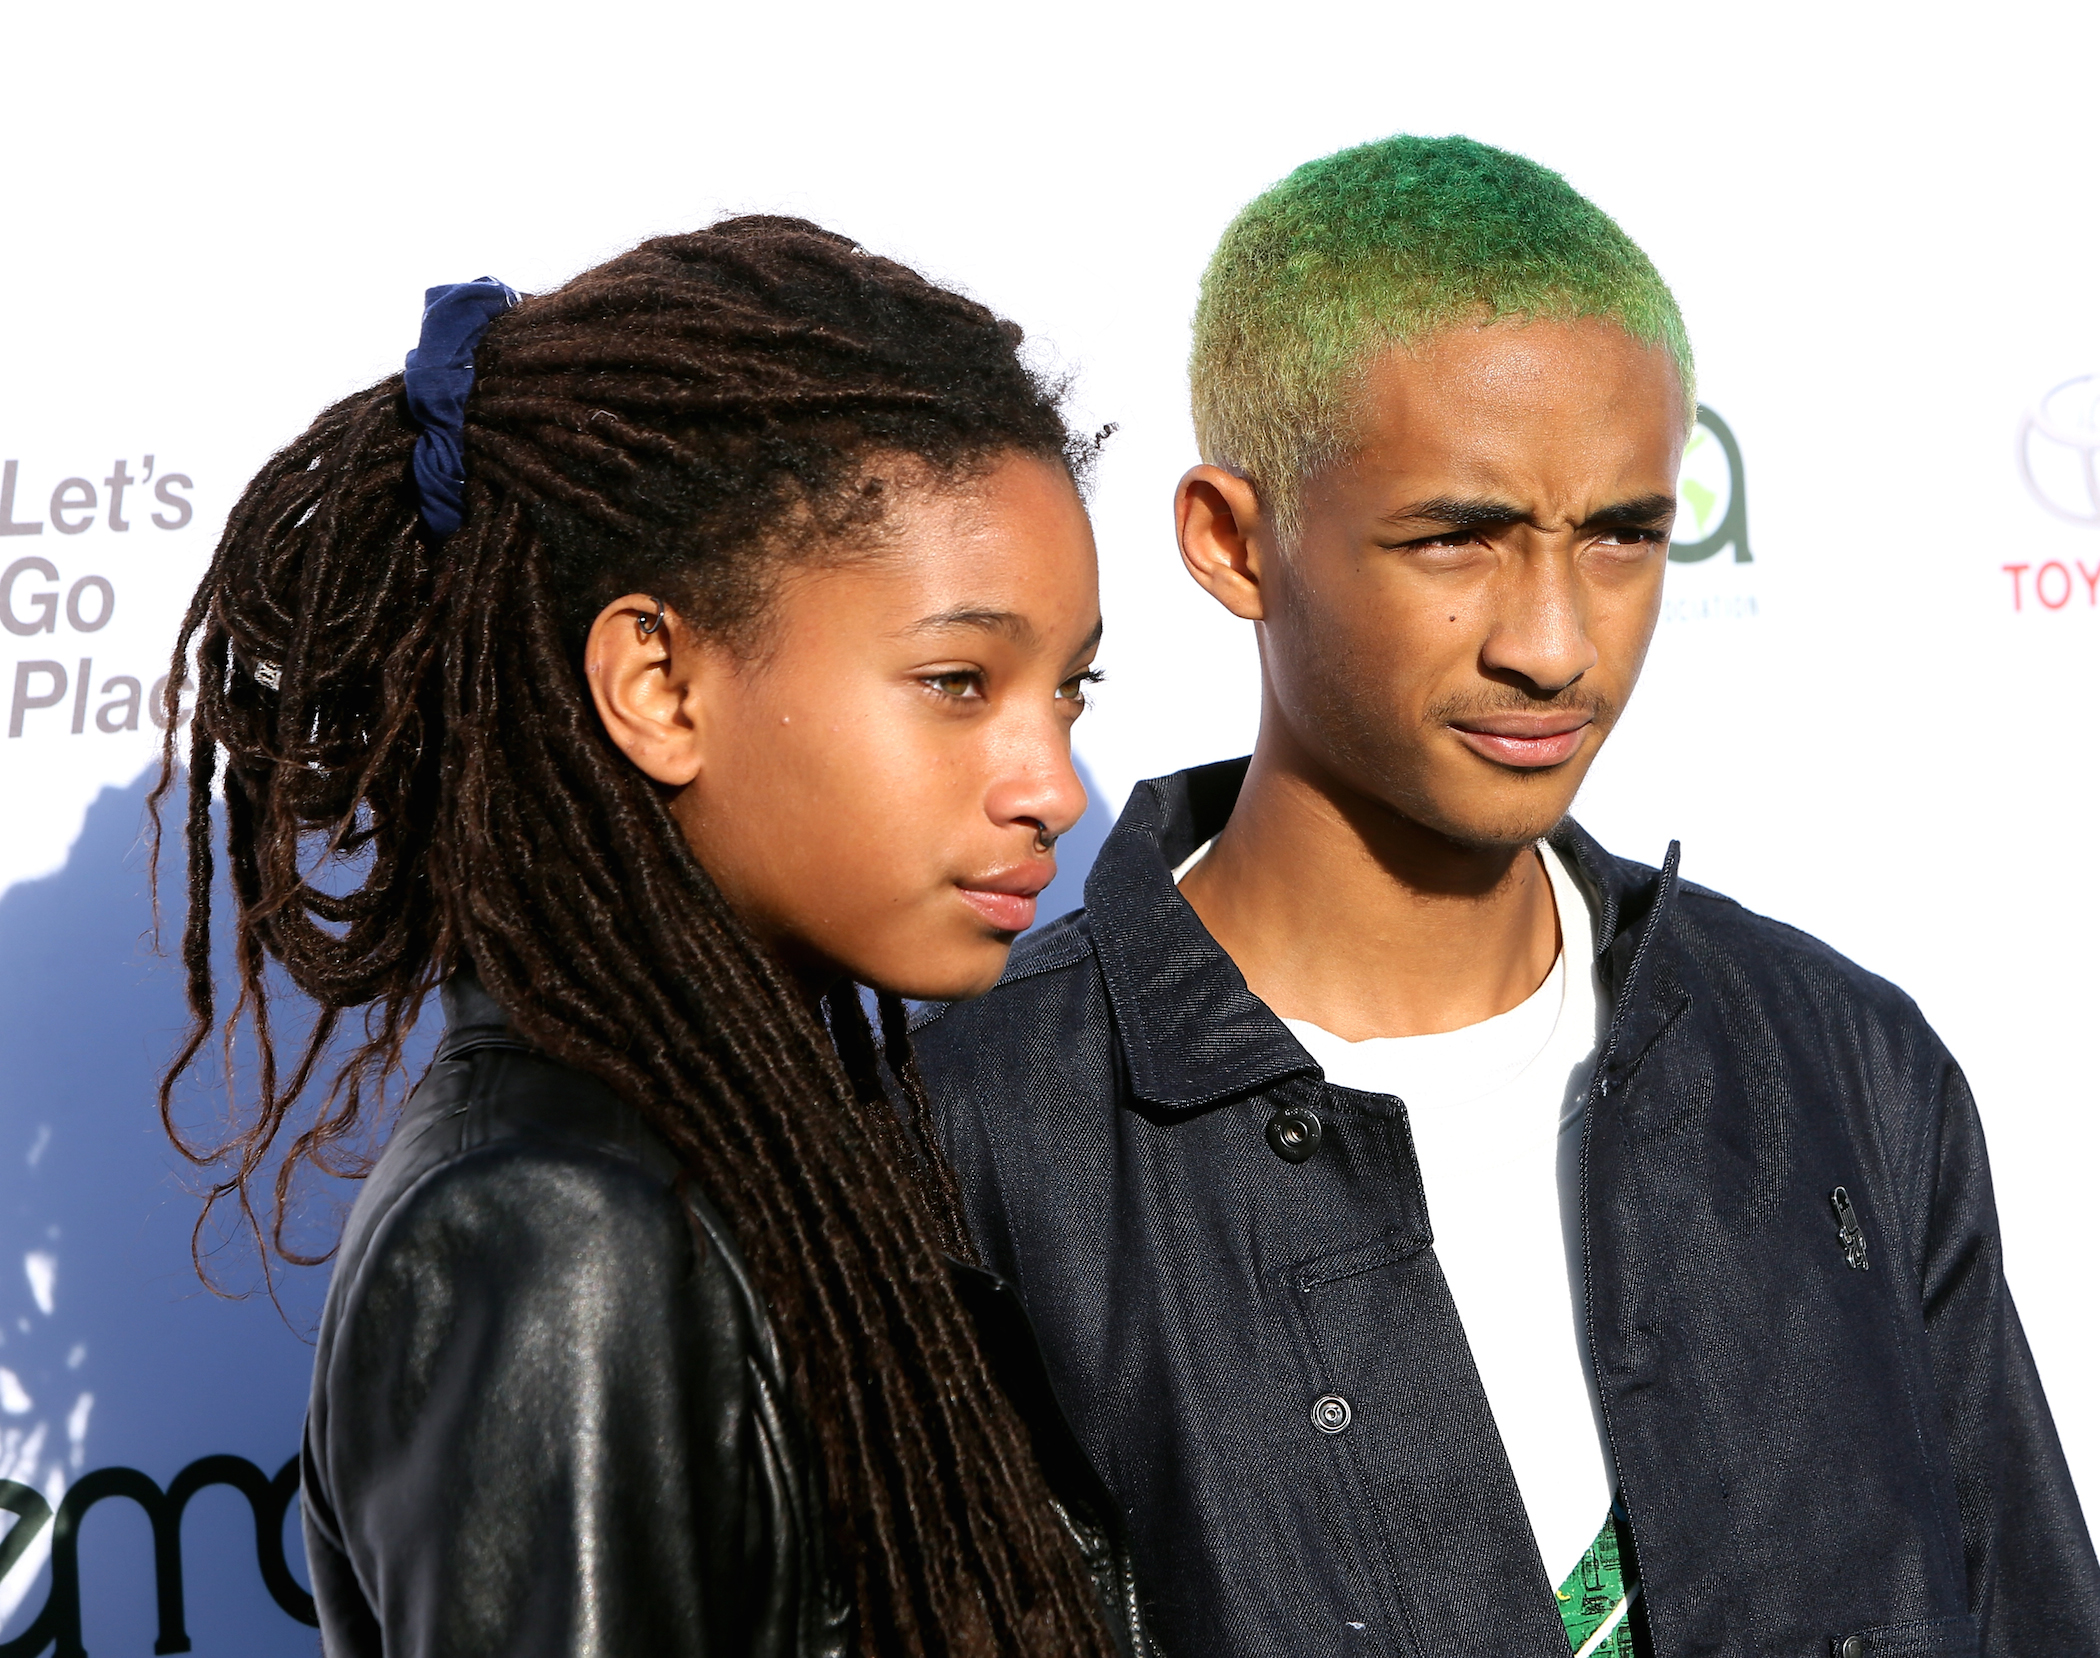 Willow Smith (L) and Jaden Smith attend the 27th Annual EMA Awards